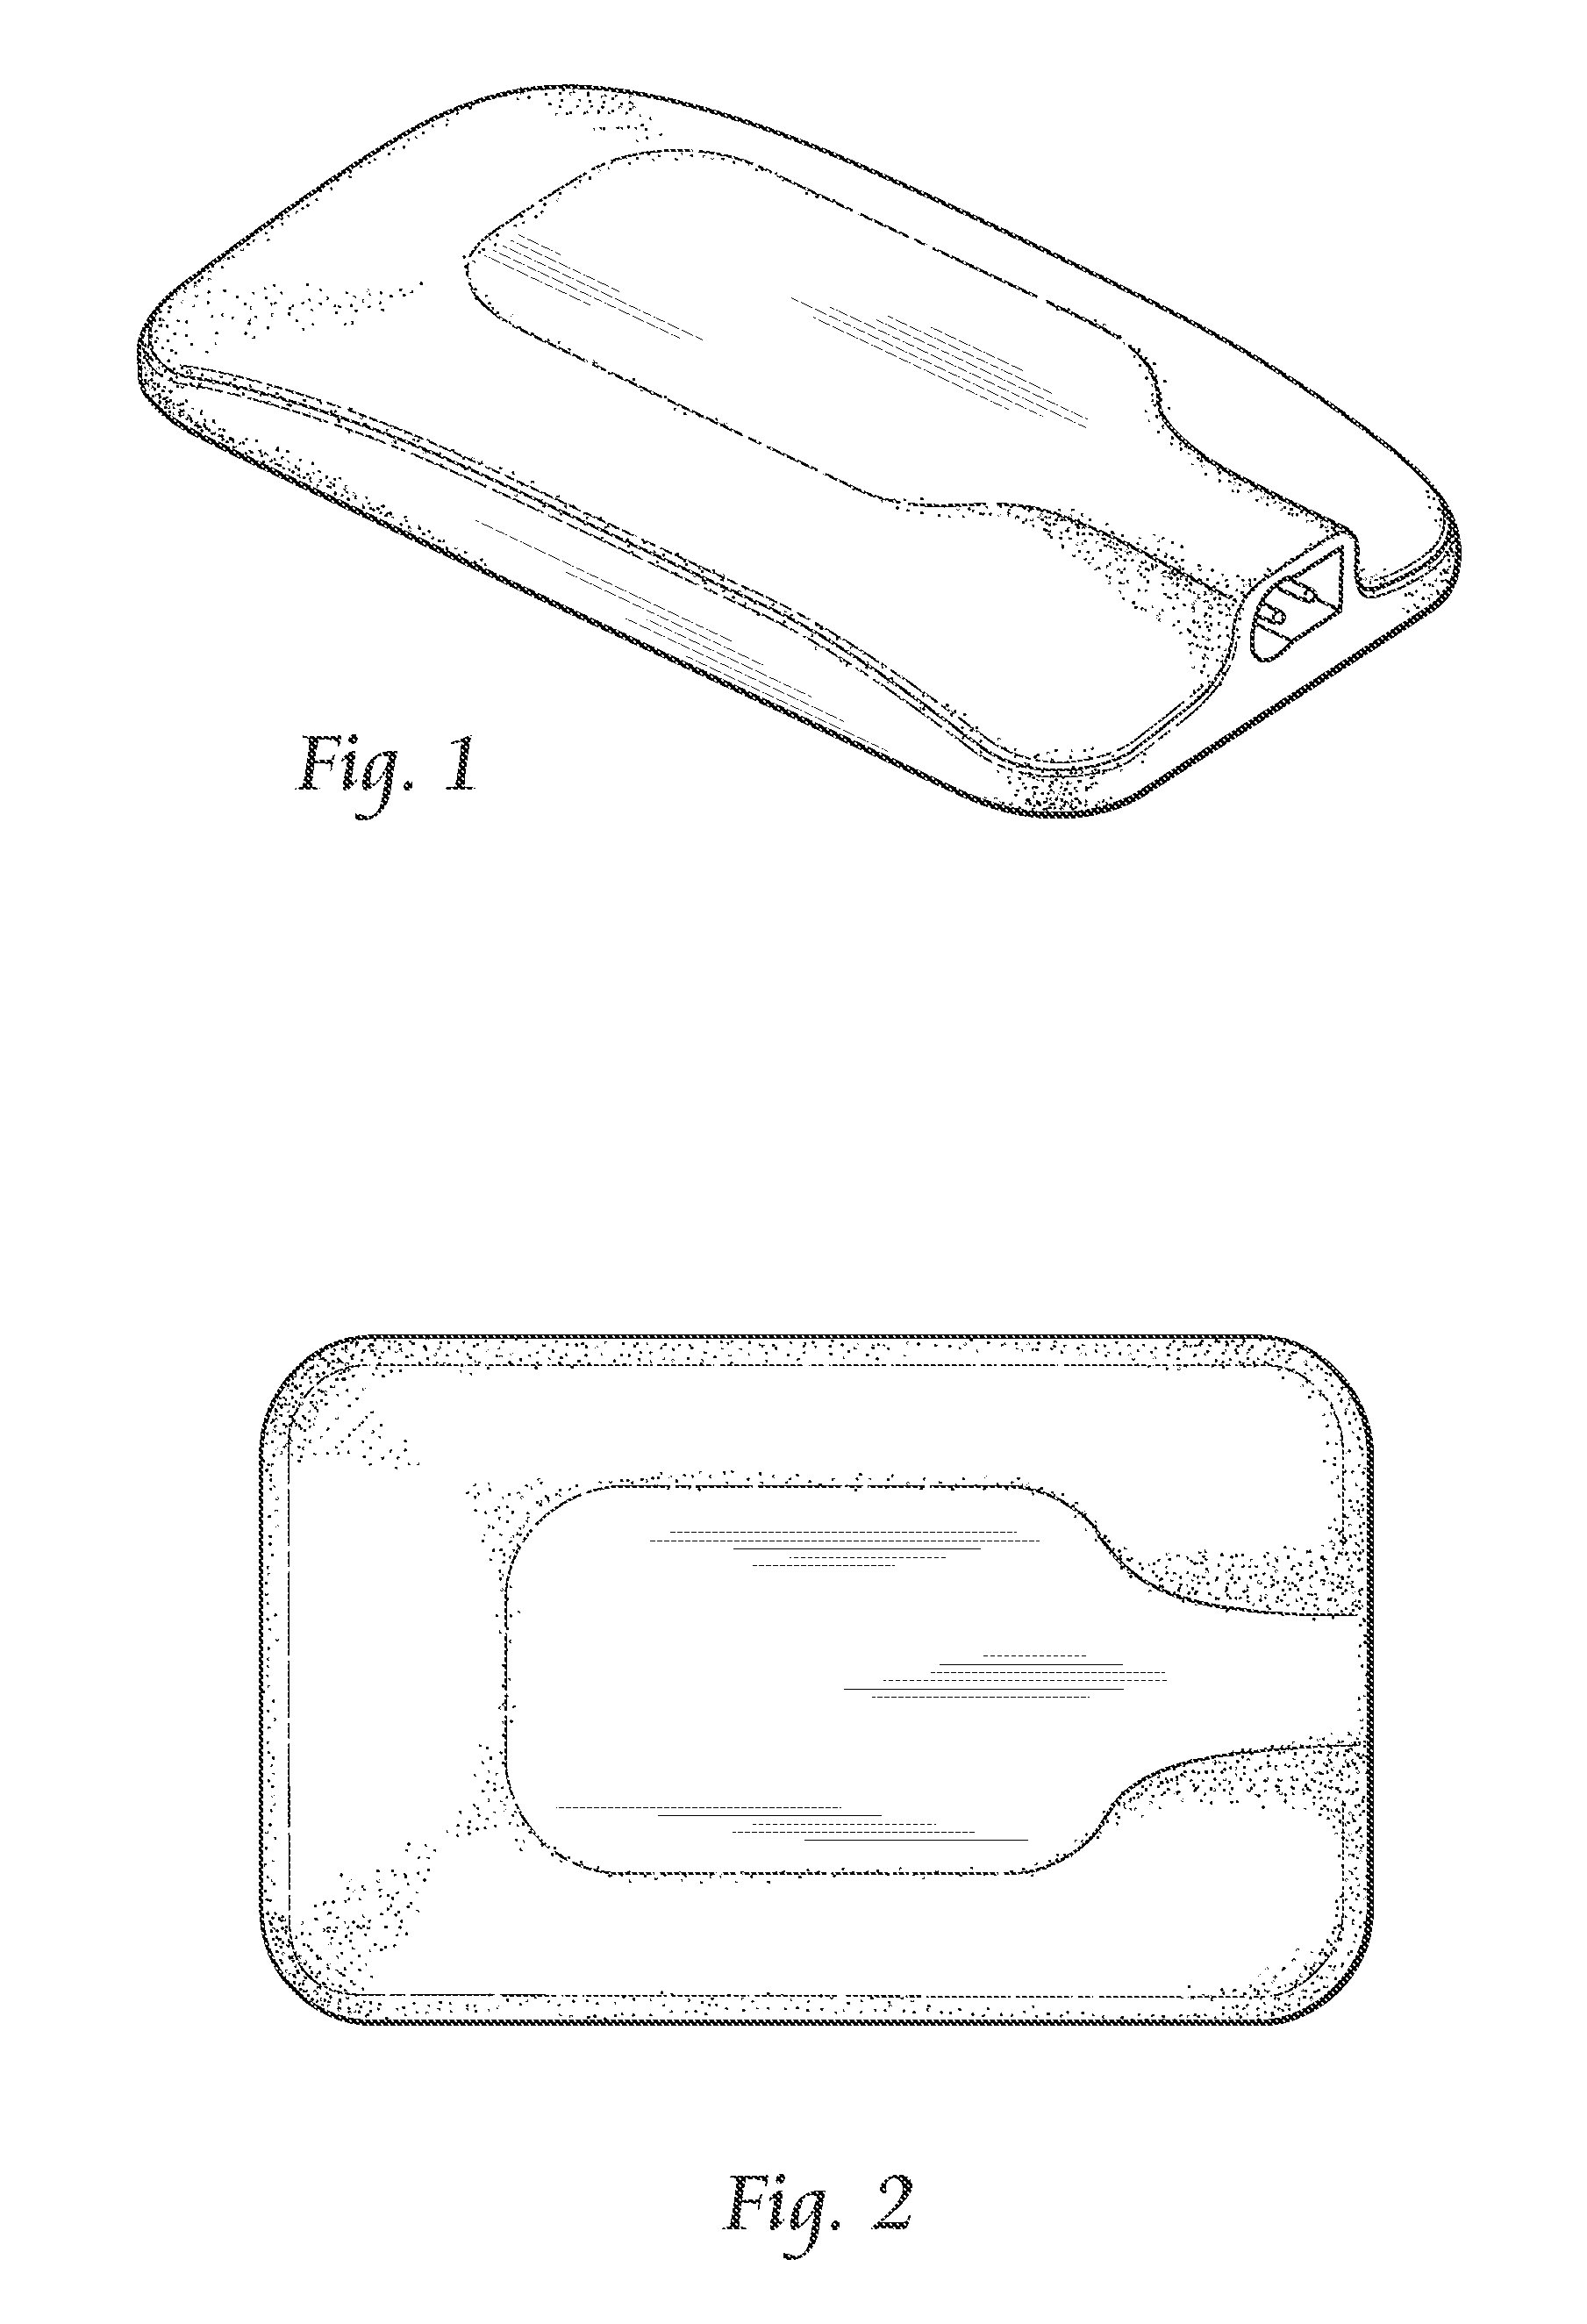 Systems and Methods for Providing Percutaneous Electrical Stimulation